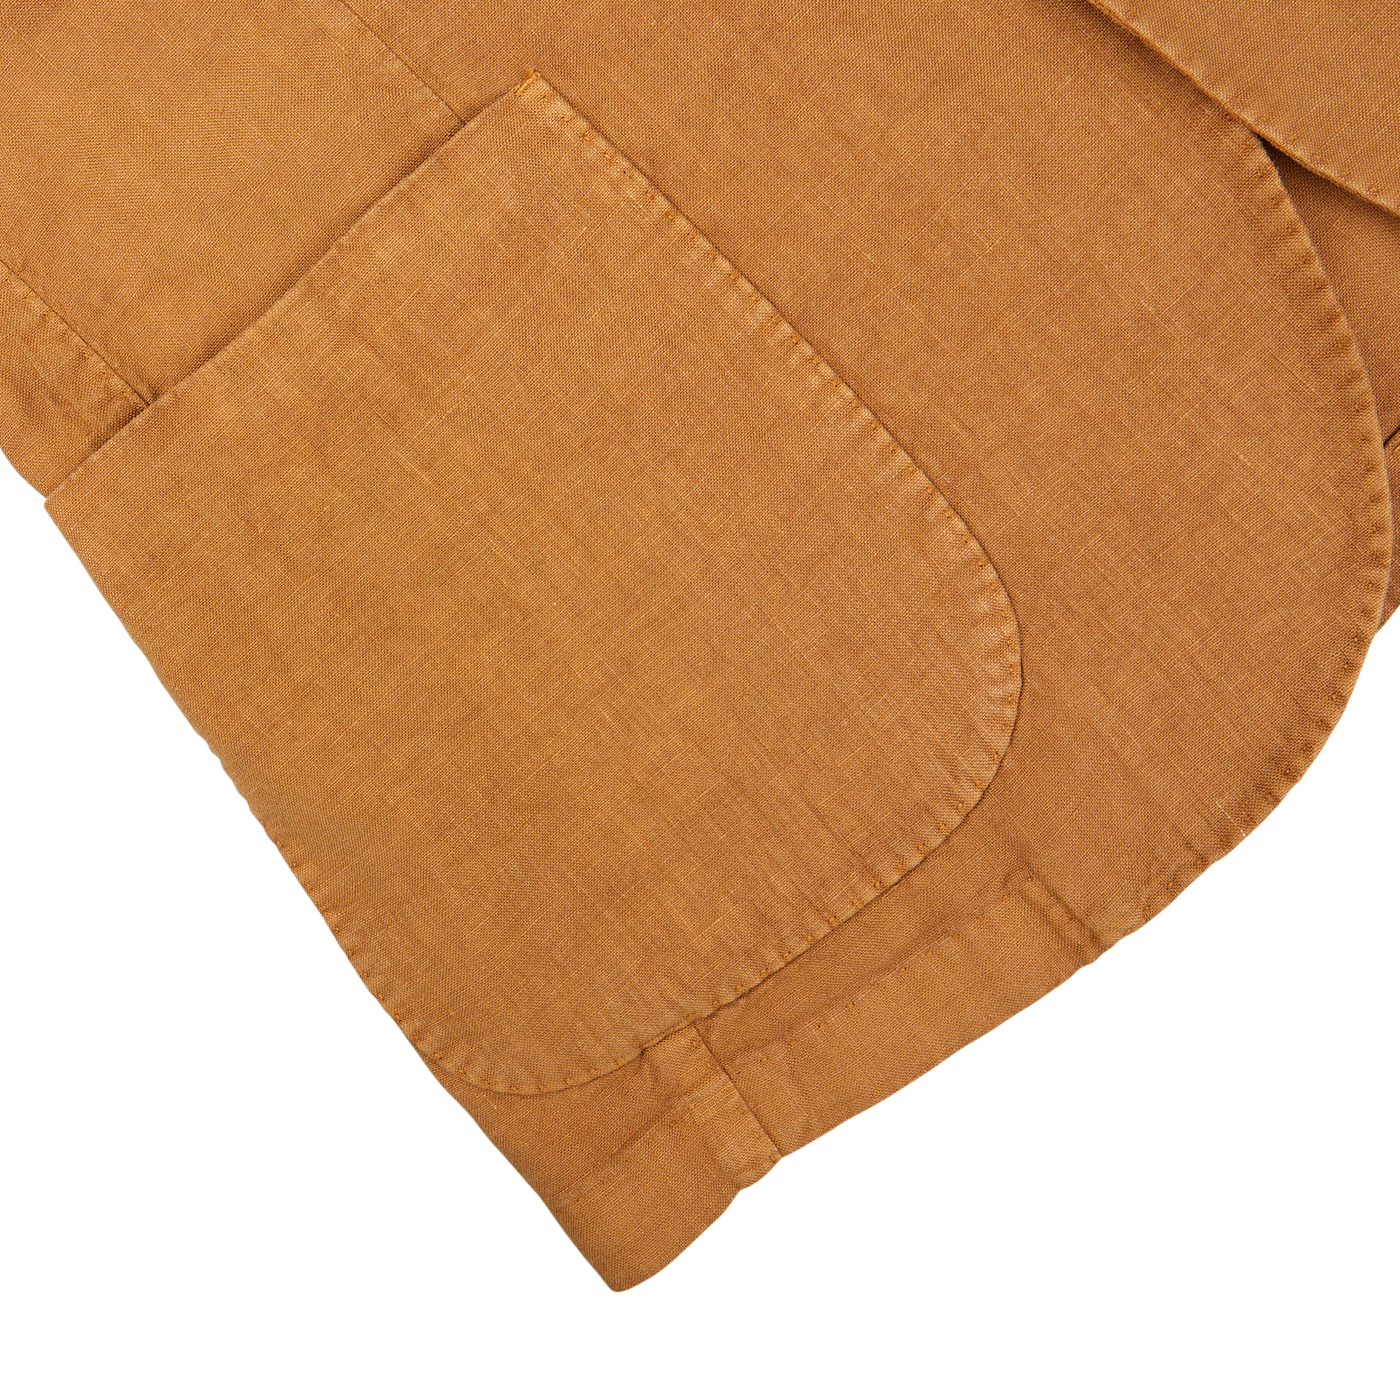 A close-up of a Tobacco Brown Washed Linen Blazer with a pocket detail on a white background by L.B.M. 1911.